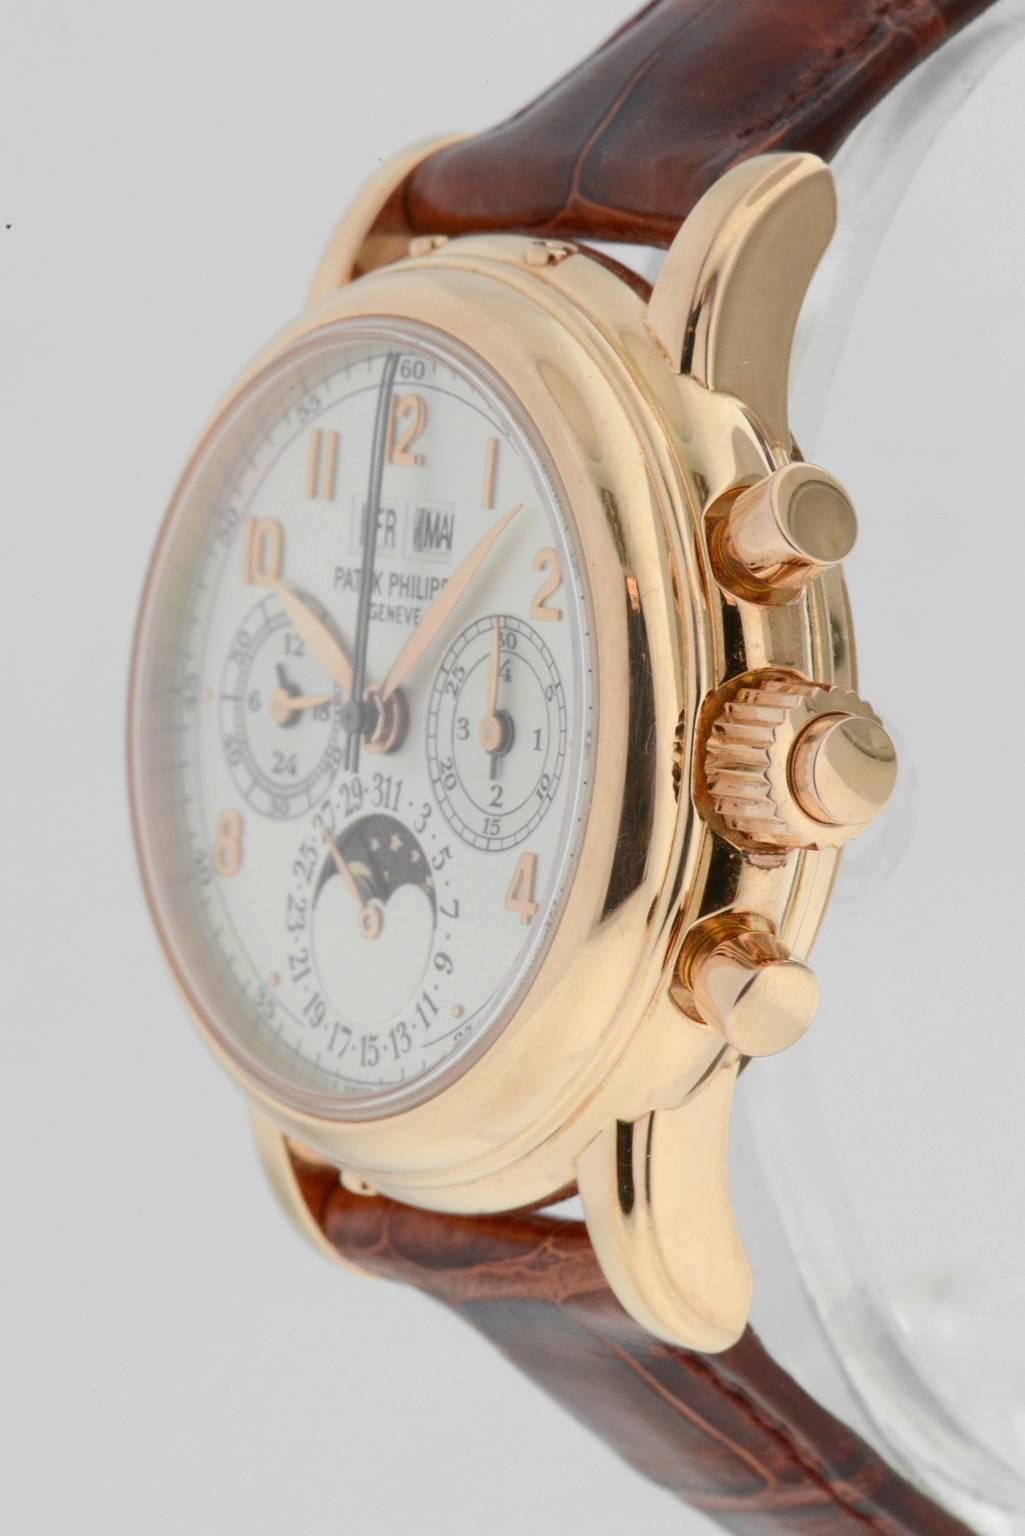 Gents rare Patek Philippe Perpetual Split Second Chronograph in 18K rose gold, Ref#5004R. On original strap with 18K rose gold tang buckle, crown with split depressor, solid and sapphire casebacks, case diameter 37mm. Manual winding movement,